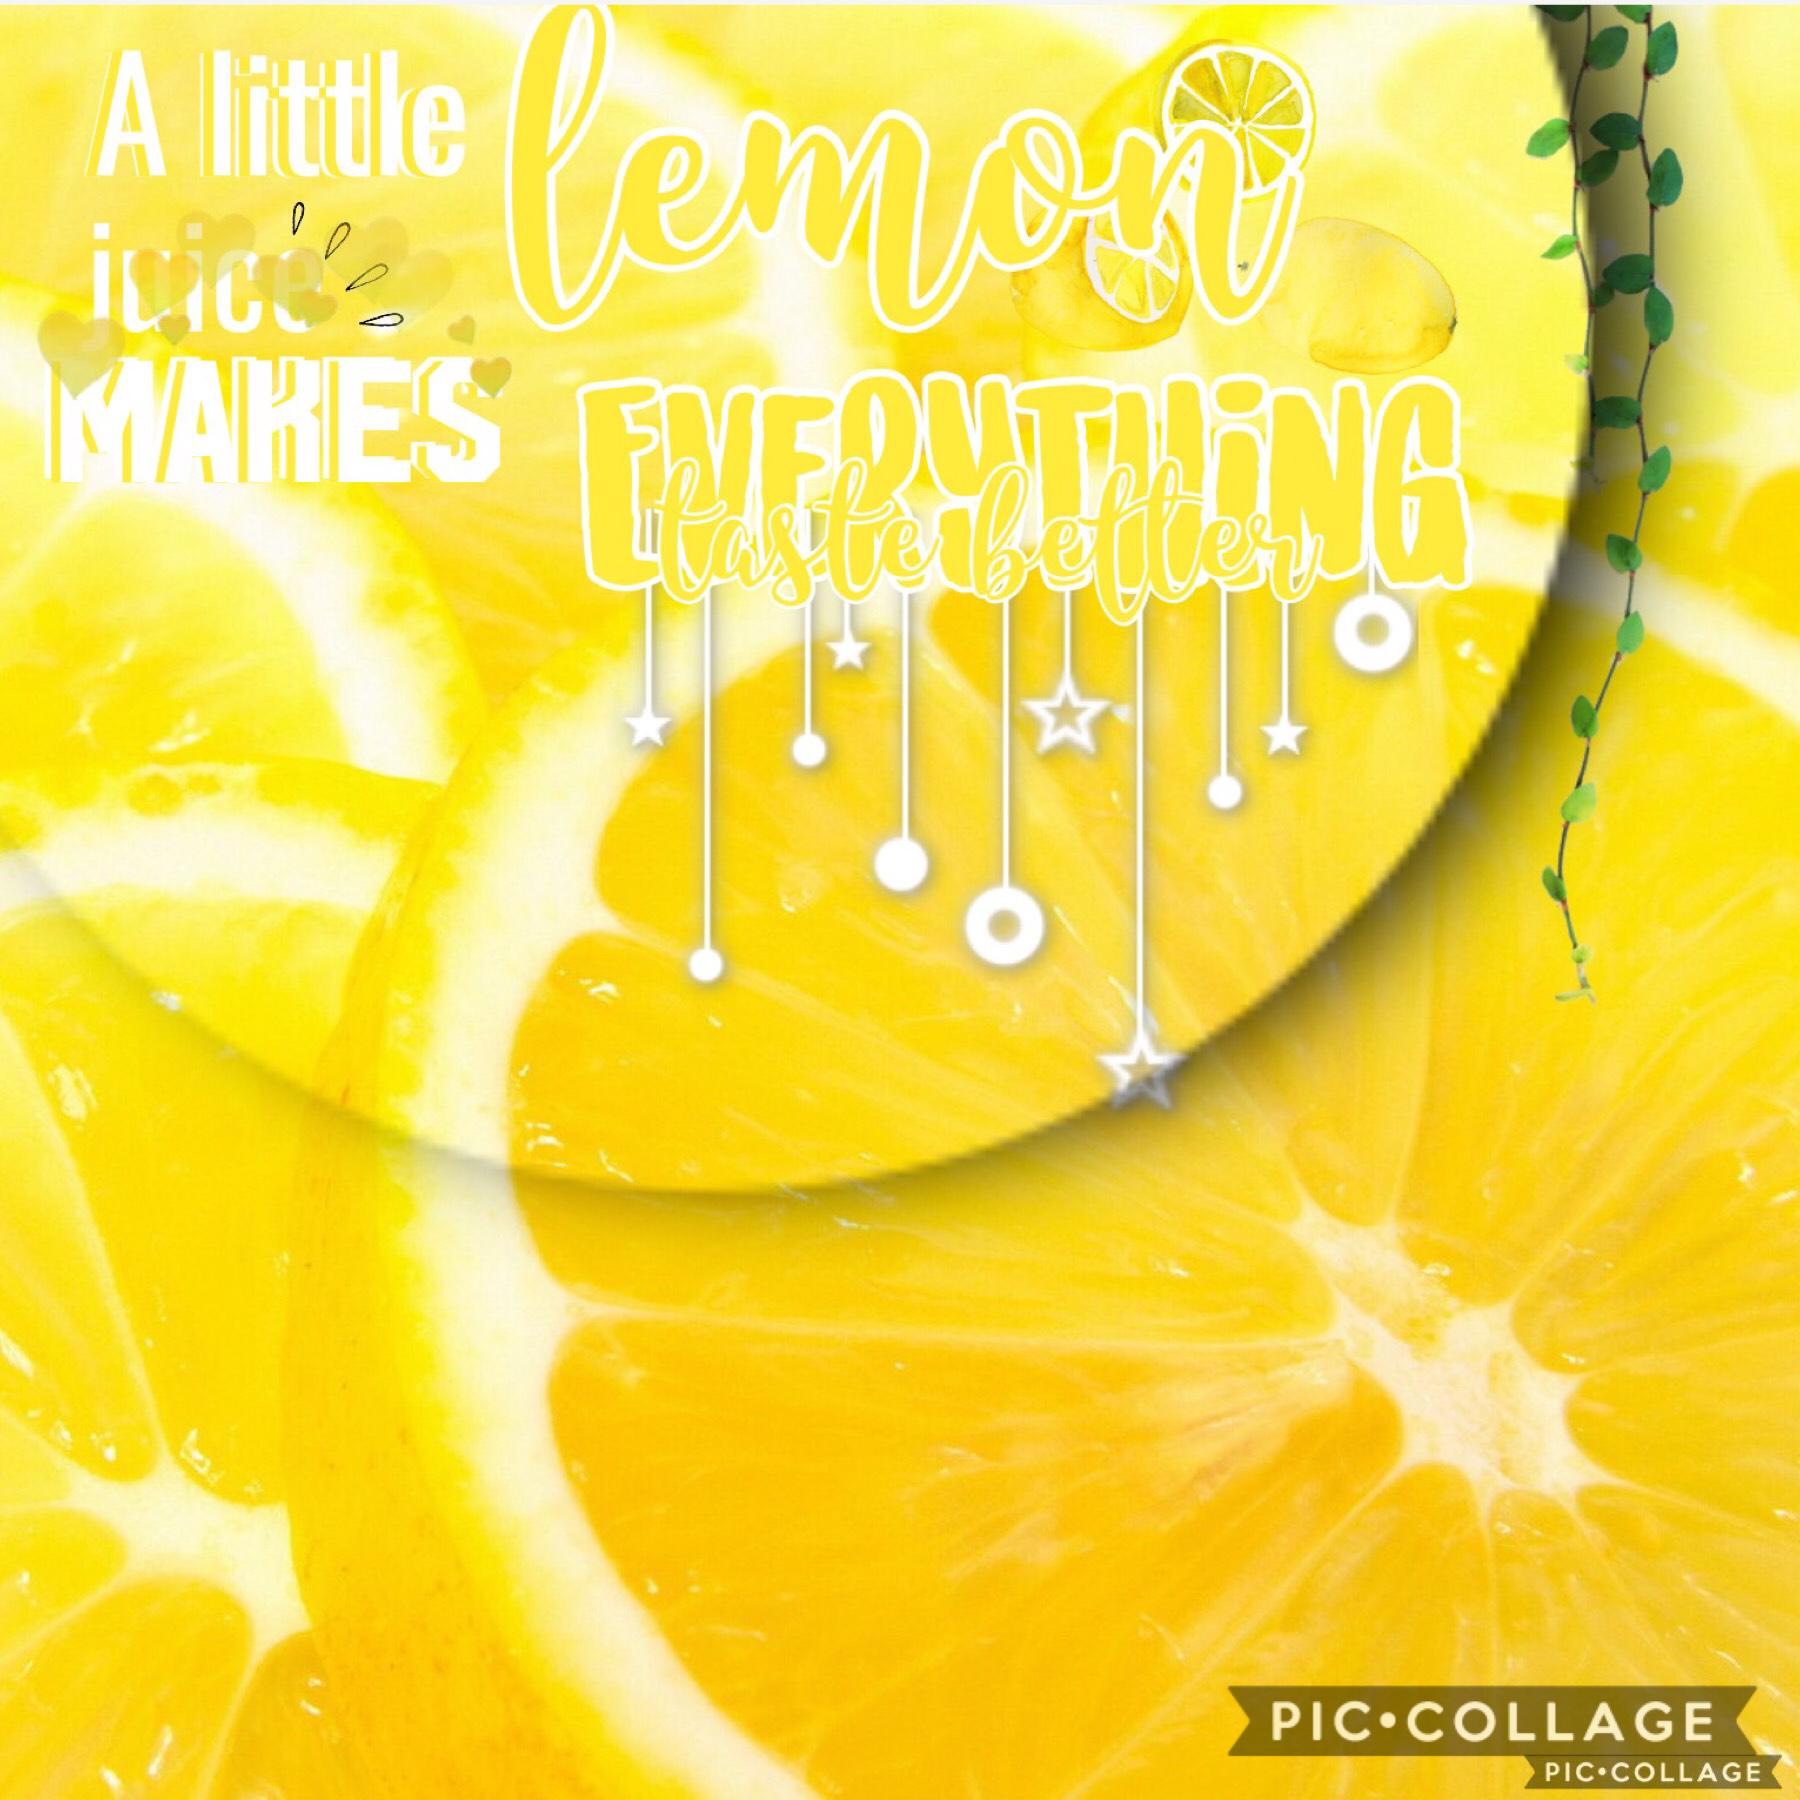 OMG WHY I ALWAYS FORGET TO POST THIS LEMON 🍋??
MAYBE I DON LIKE LEMONS, IDK AND IDC... HOPE U LIKE THIS POST❤️❤️🍋🍋🍋